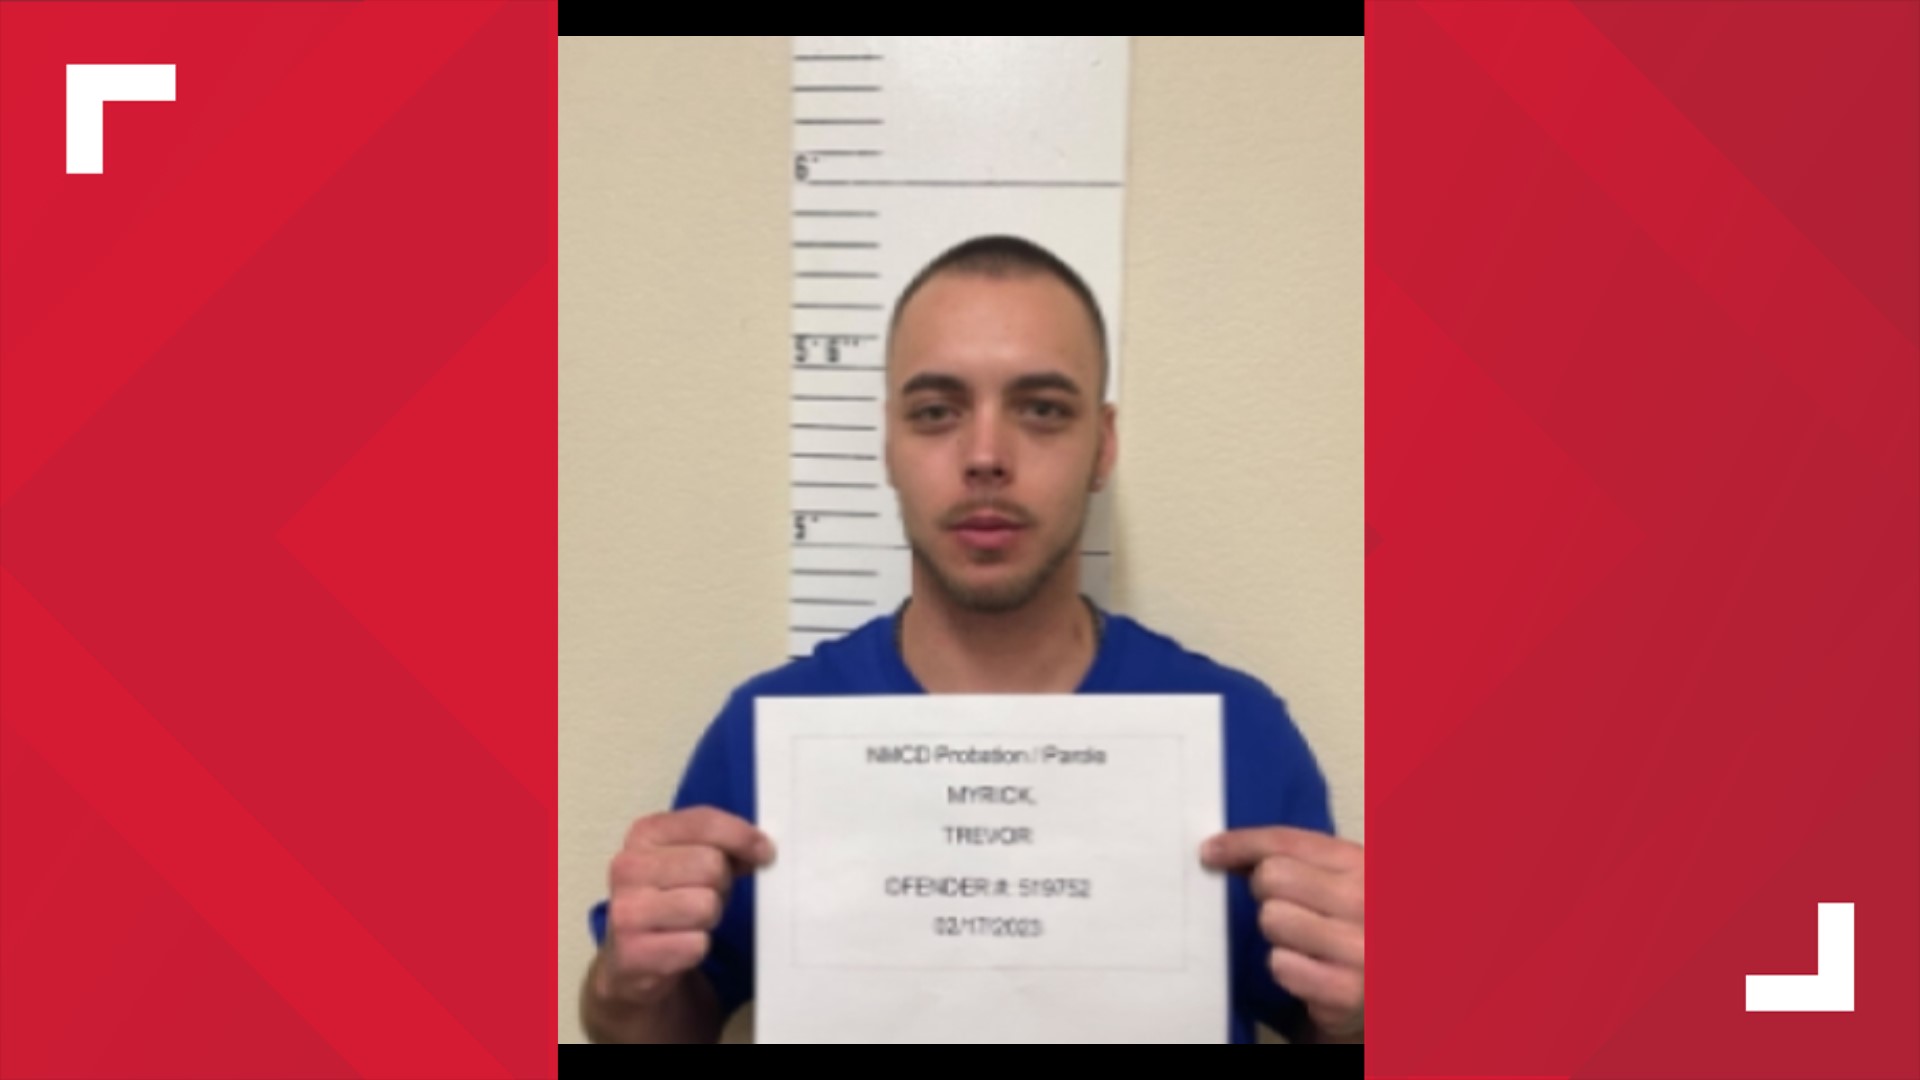 NewsWest 9 has obtained past arrest affidavits of criminal charges filed against 26-year-old Trevor Myrick of Hobbs, New Mexico.